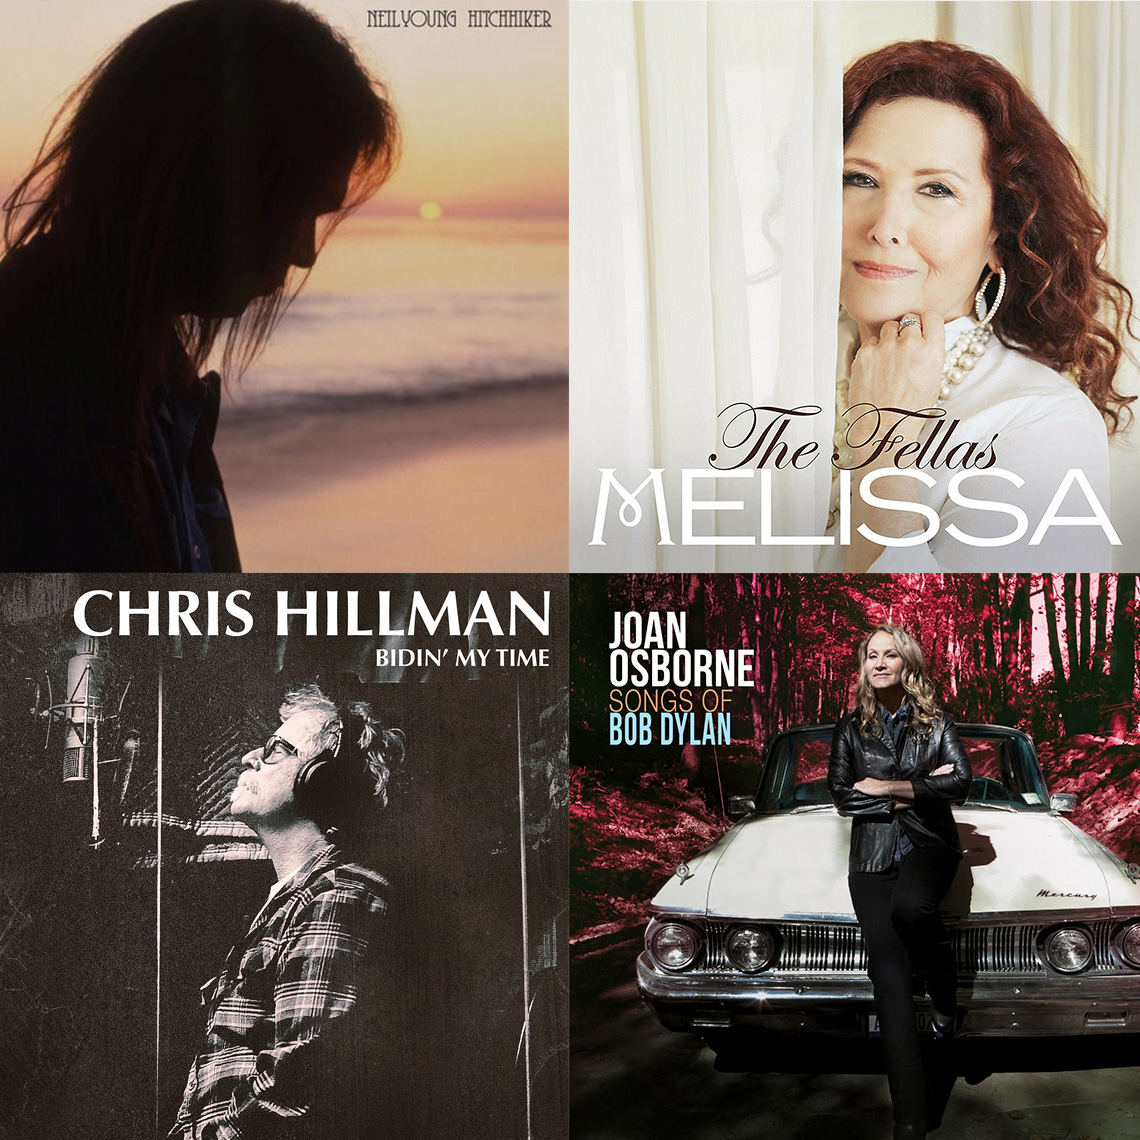 New Albums by Neil Young, Melissa Manchester, Chris Hillman and Joan Osborne